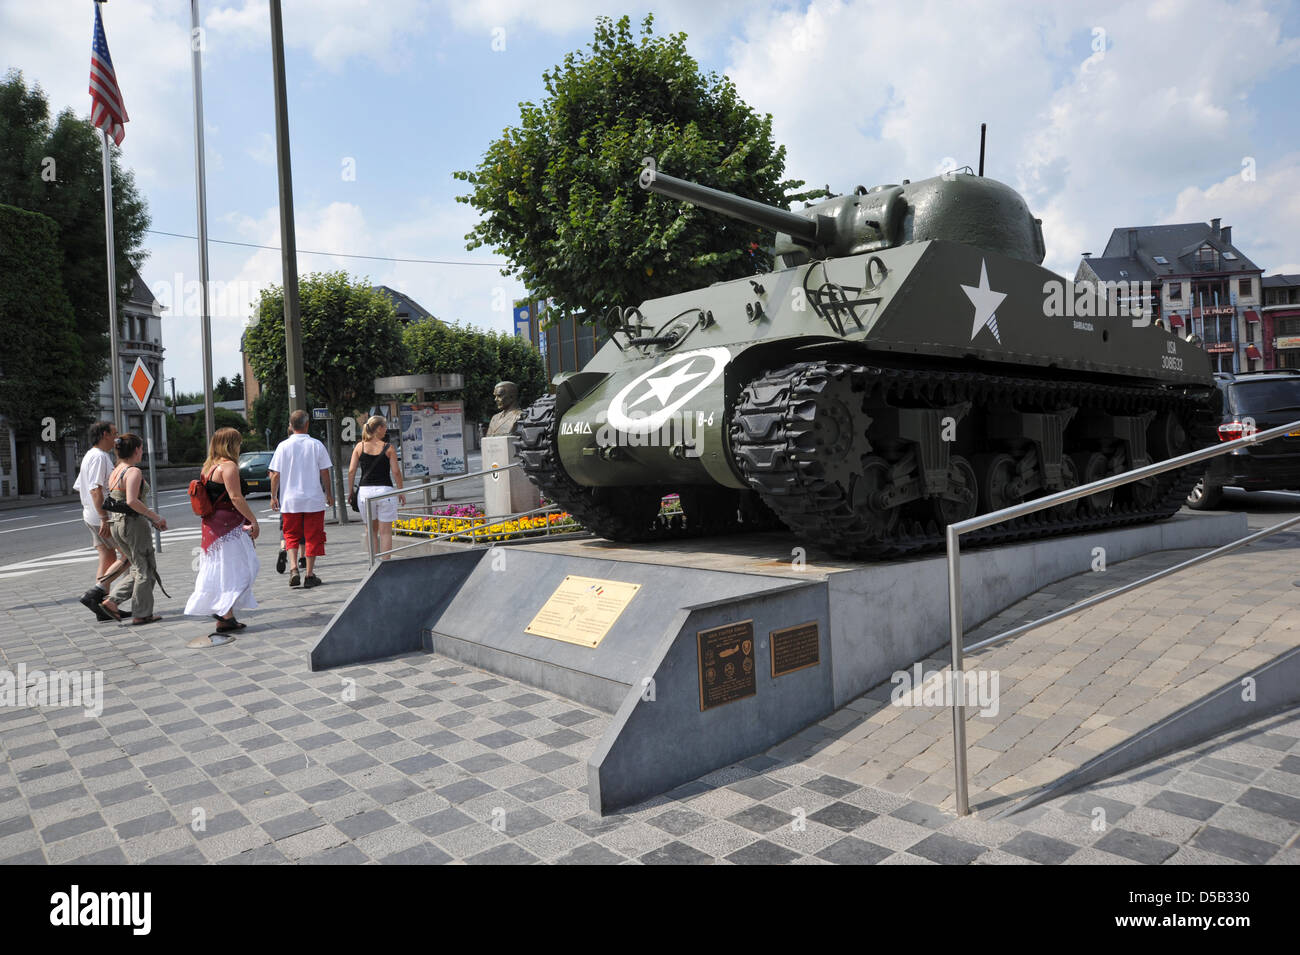 A Sherman tank and the General McAuliffe memorial pictured on the McAuliffe square in Bastogne, Belgium, August 2009. US army General Anthony Clement McAuliffe was a war hero of the battle in Bastogne and became famous for answering ?Nuts? to the German demand for capitulation on 22 December 1944. The allied victory in Bastogne is considered a turning point in Word War II and opene Stock Photo